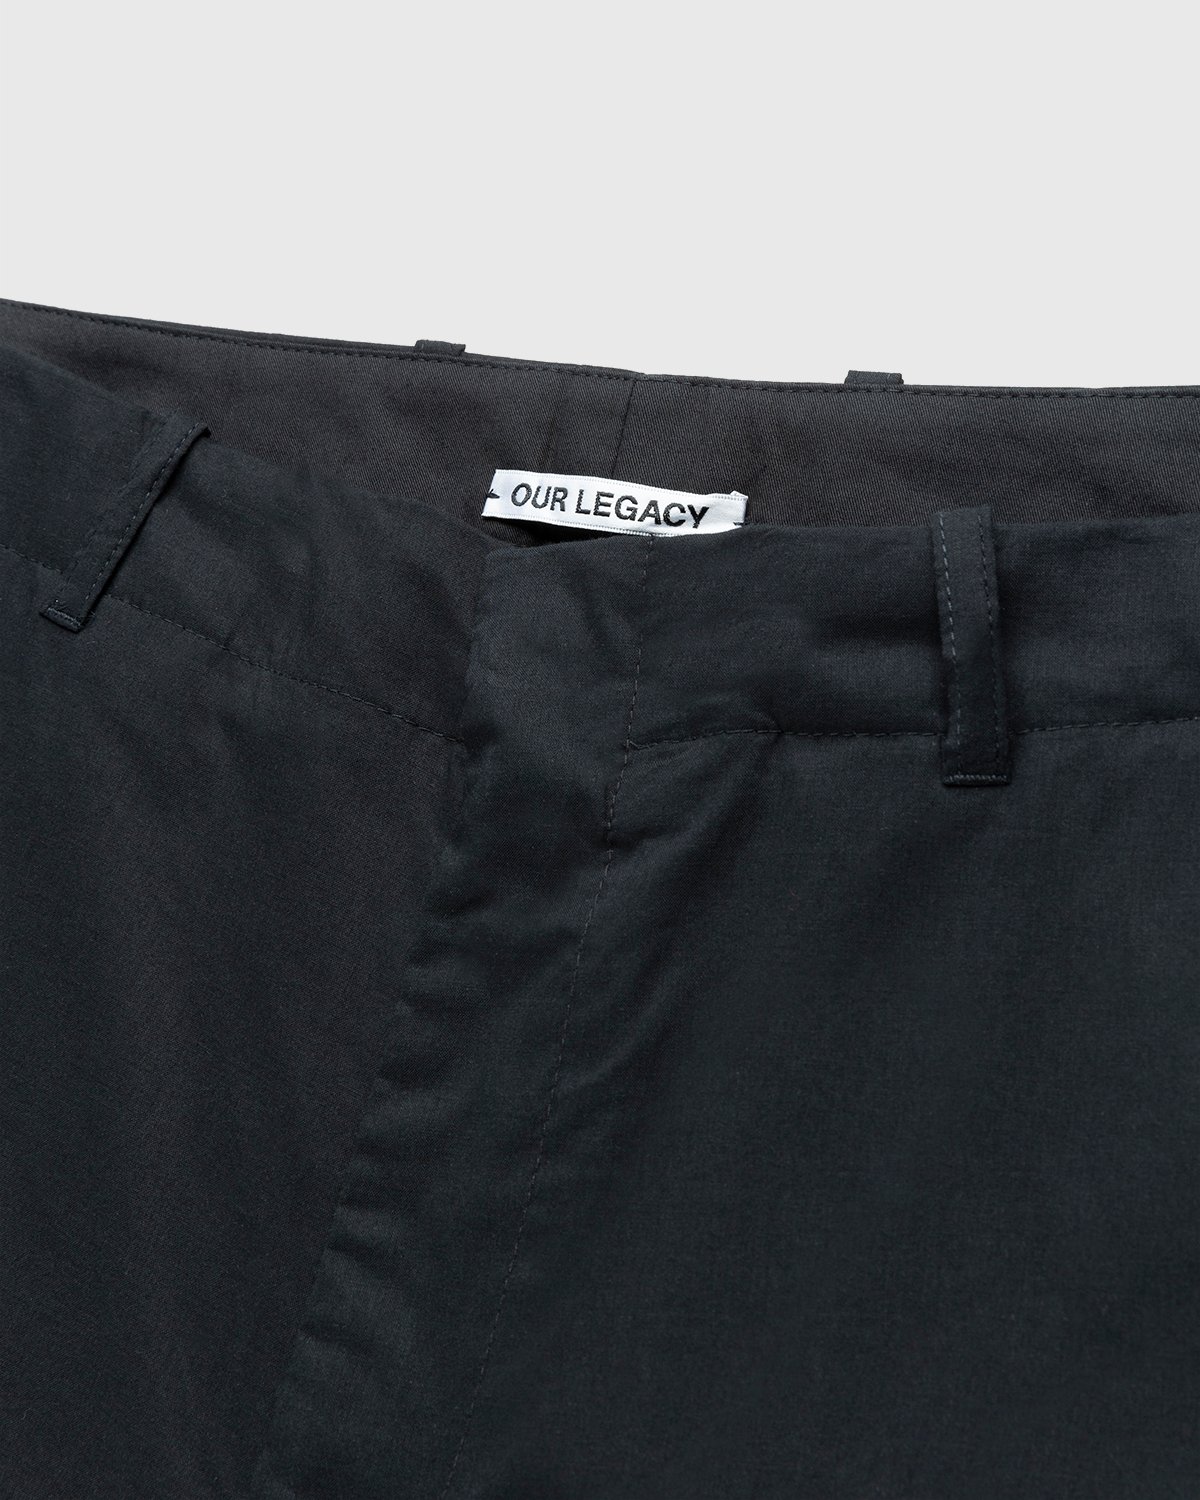 Our Legacy - Borrowed Chino Black Voile - Clothing - Black - Image 3